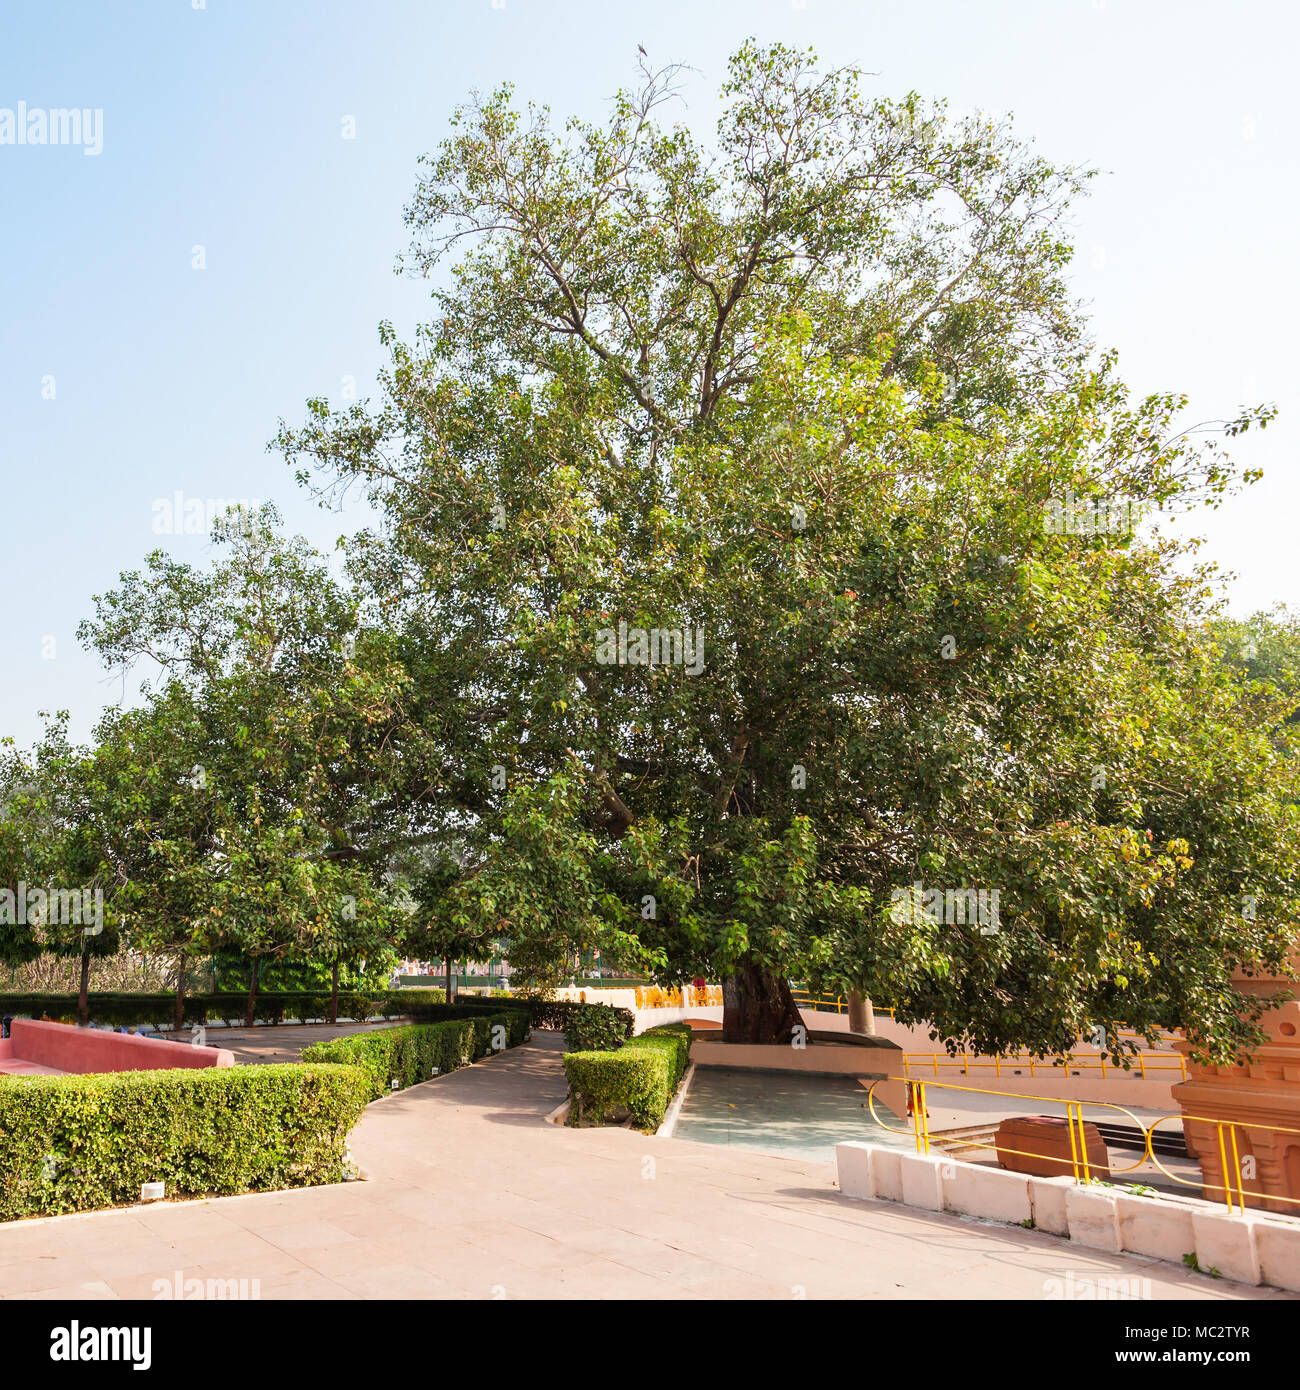 The Bodhi Tree is a large and very old sacred fig tree located in Bodh Gaya, India, under which Siddhartha Gautama Buddha is said to have attained enl Stock Photo